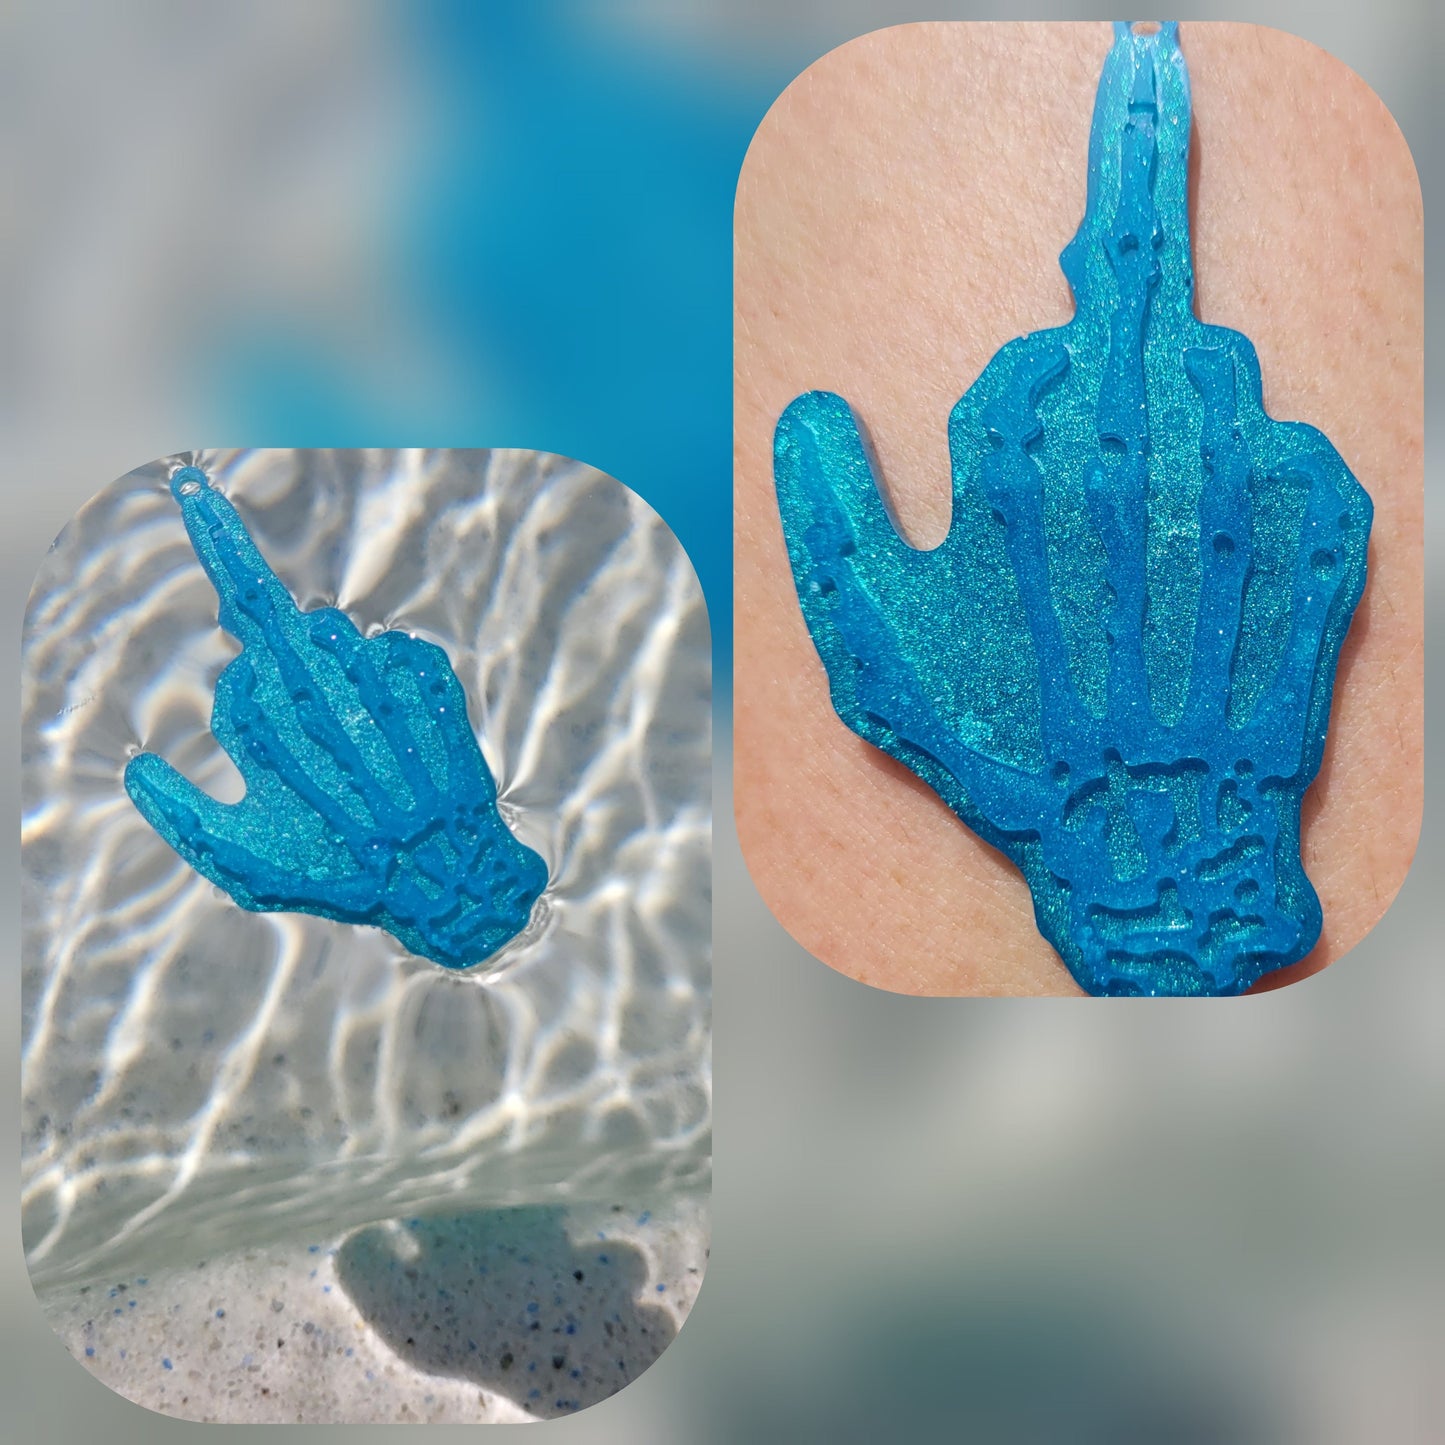 Middle Finger Keychain